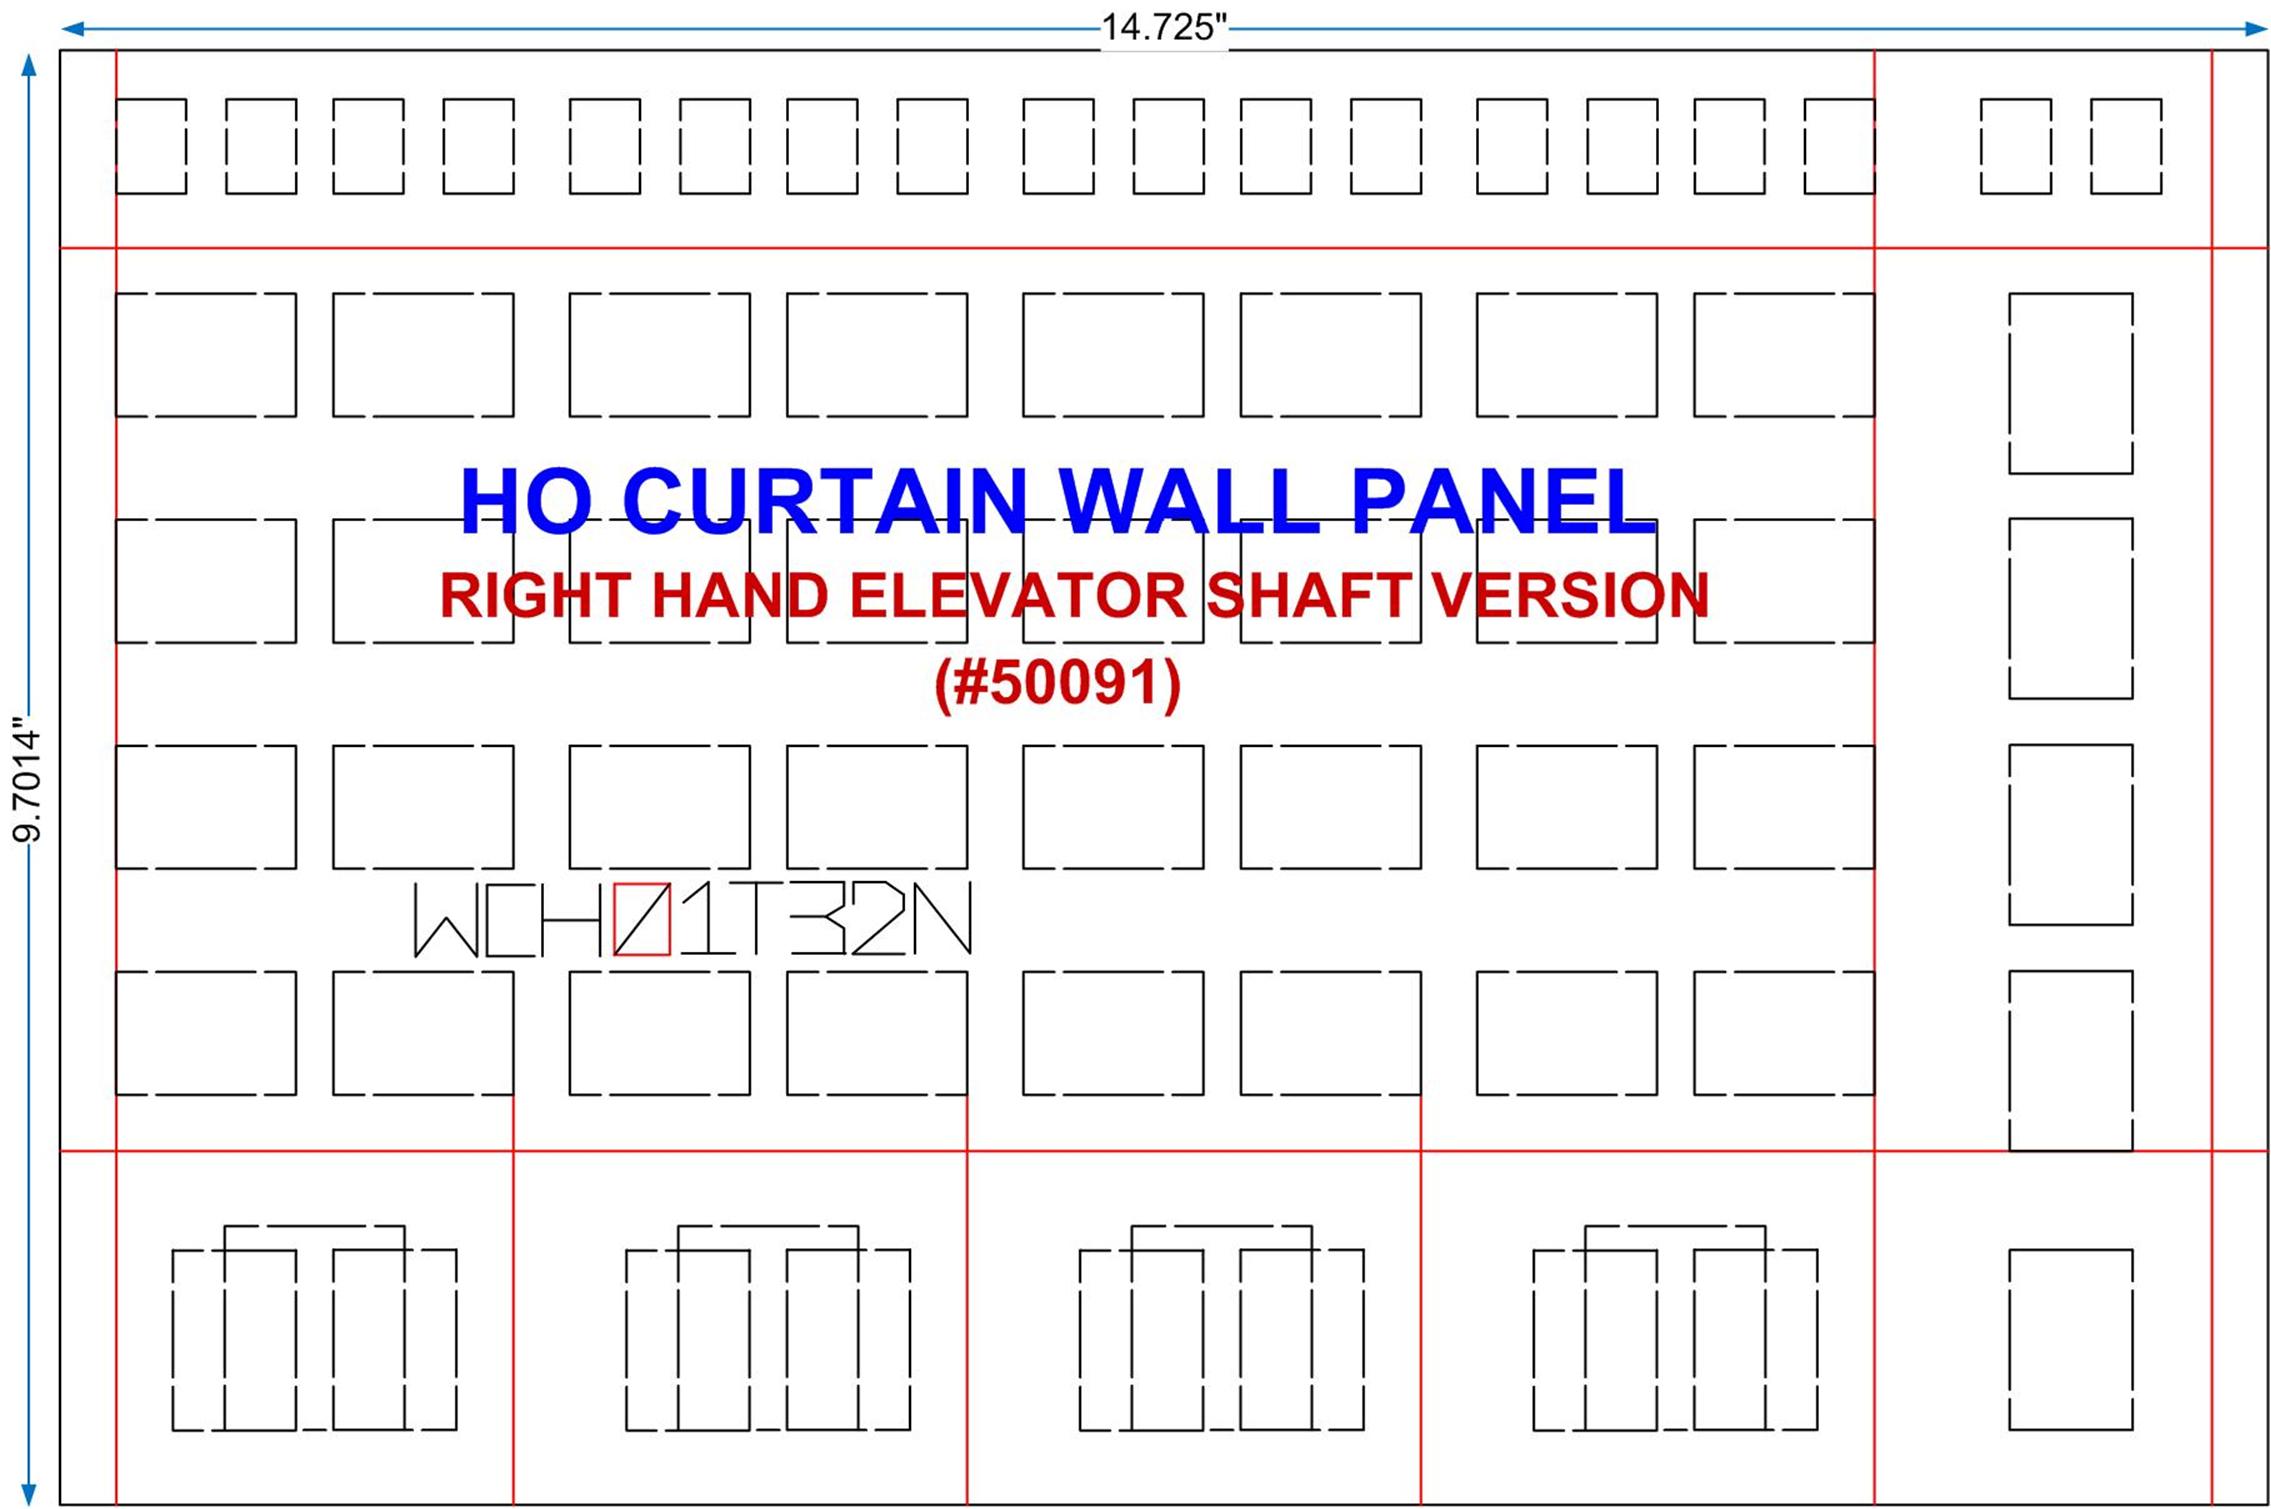 Curtain Wall System HO - Right Hand Panel Layout & Dimensions